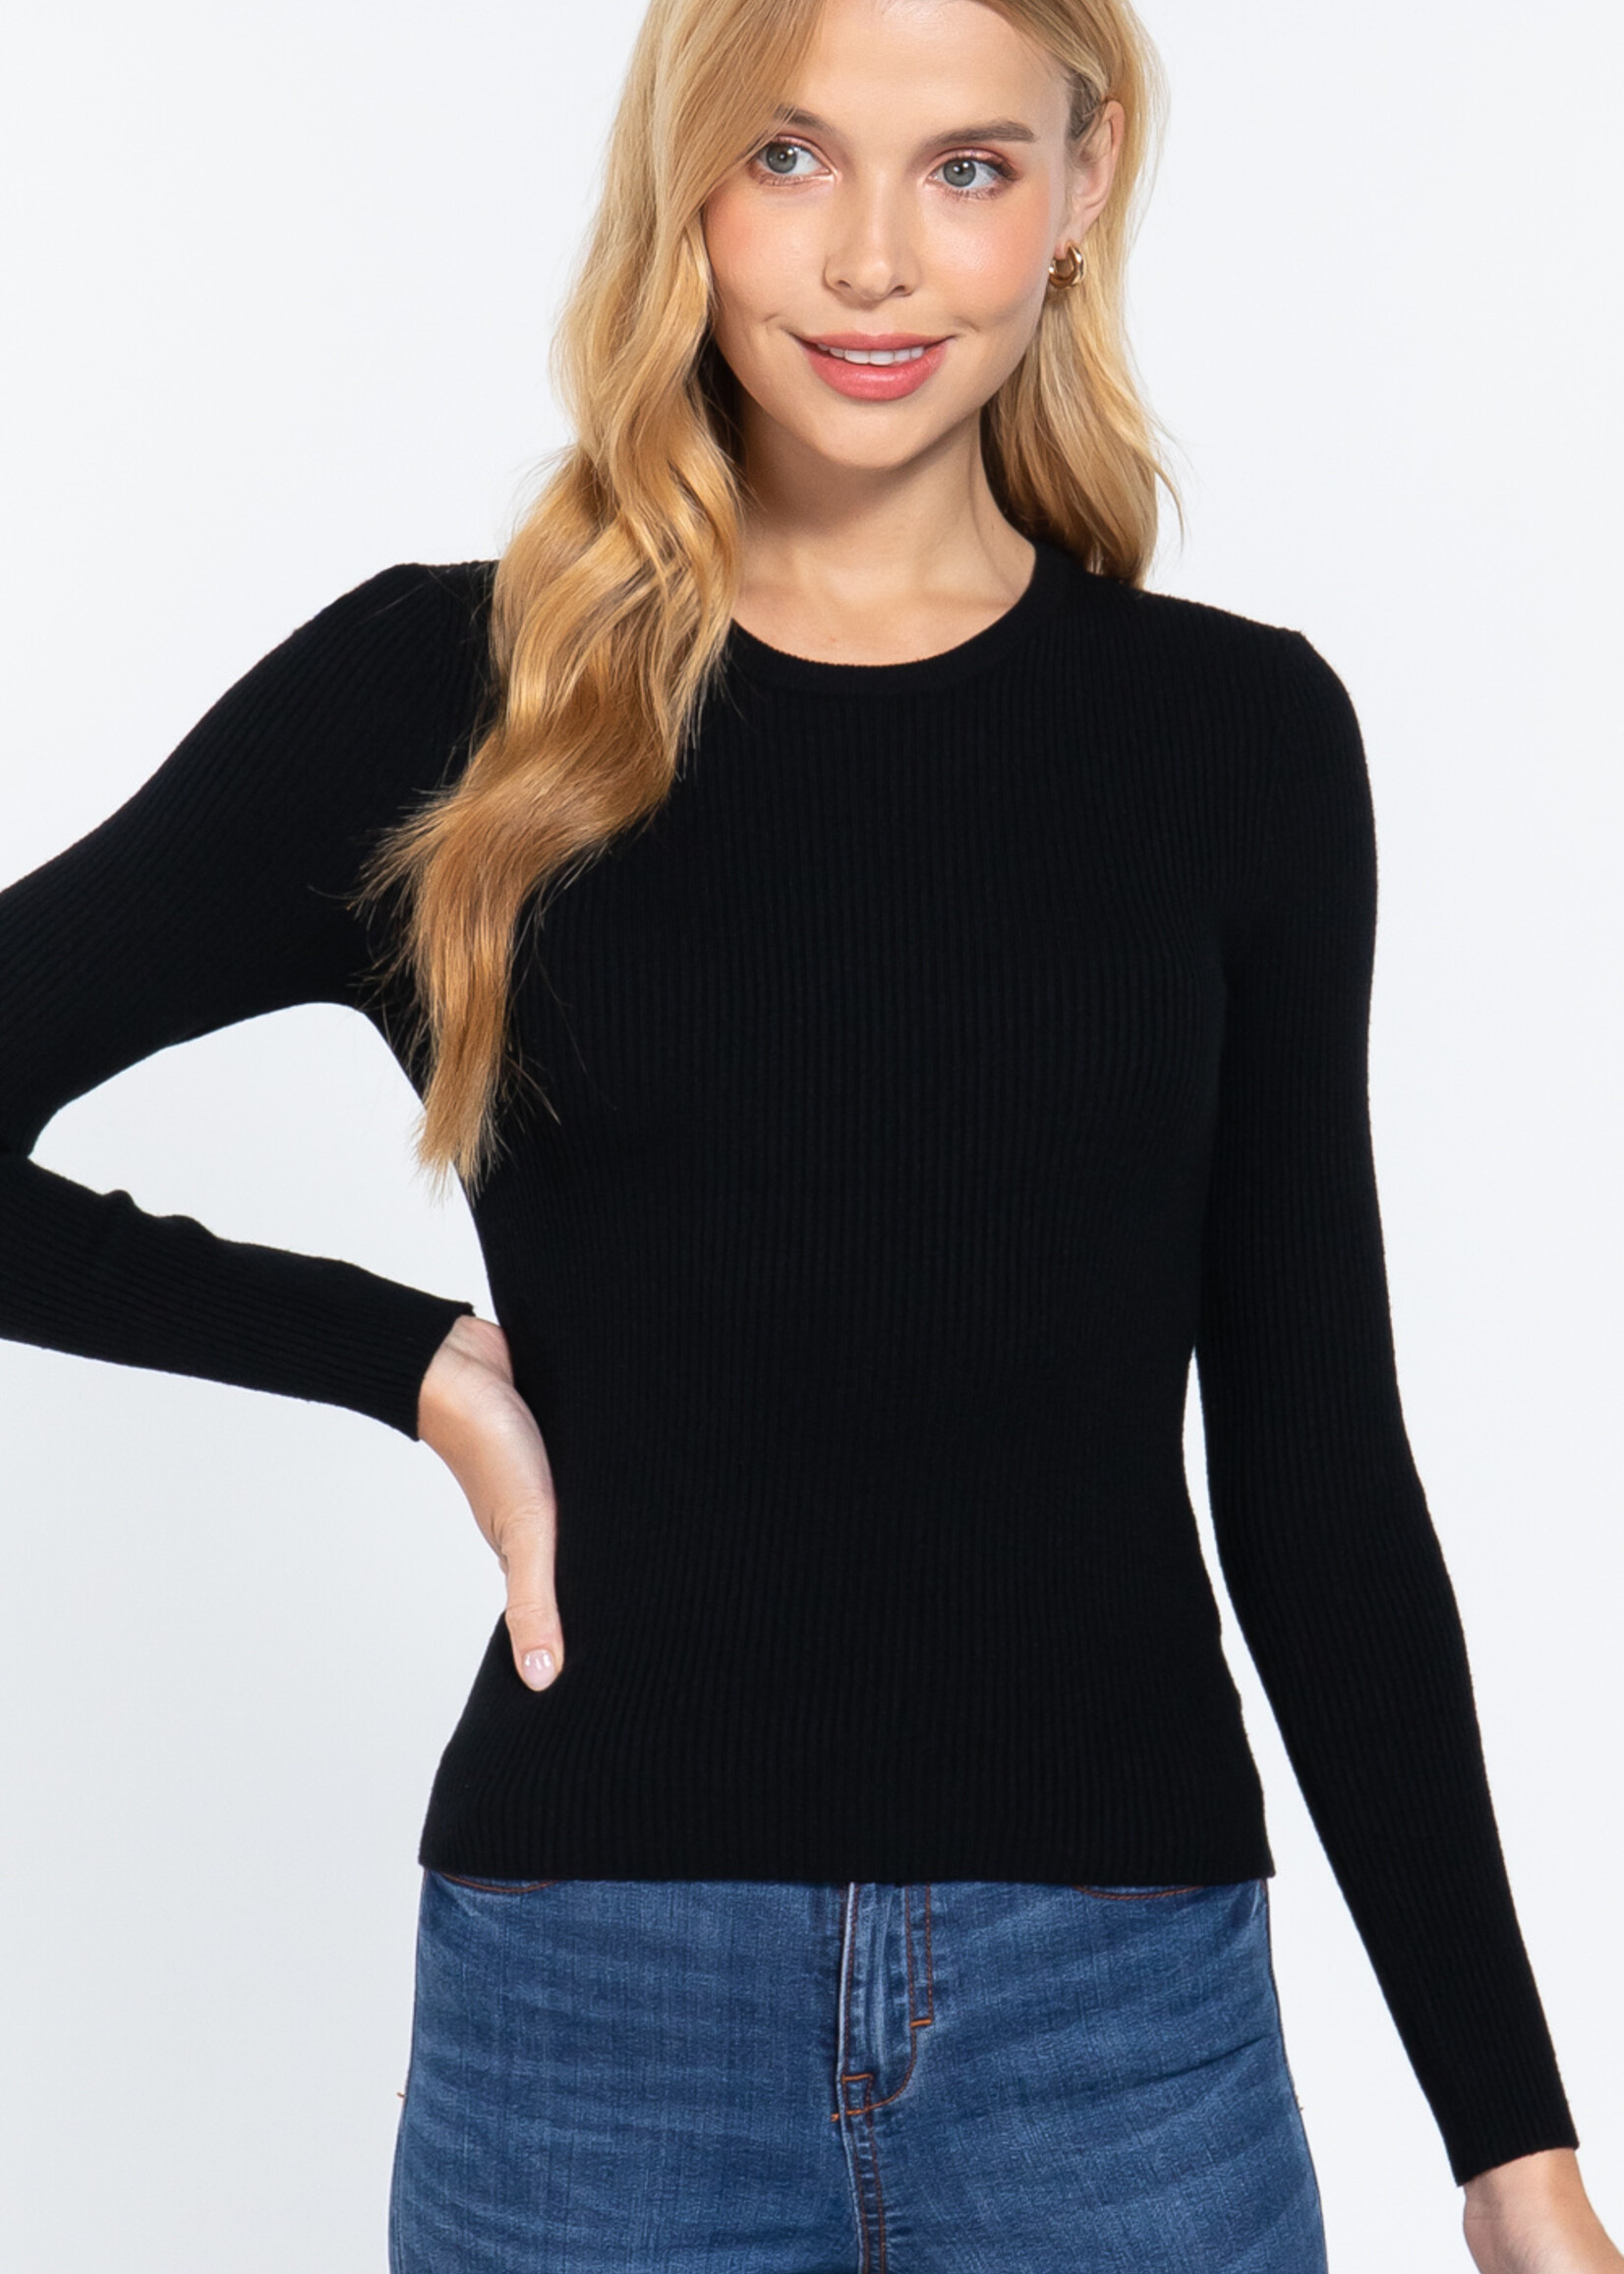 ACTIVE USA, INC. Active USA LONG SLEEVE CREW NECK fitted Rib Sweater top  - SW12227